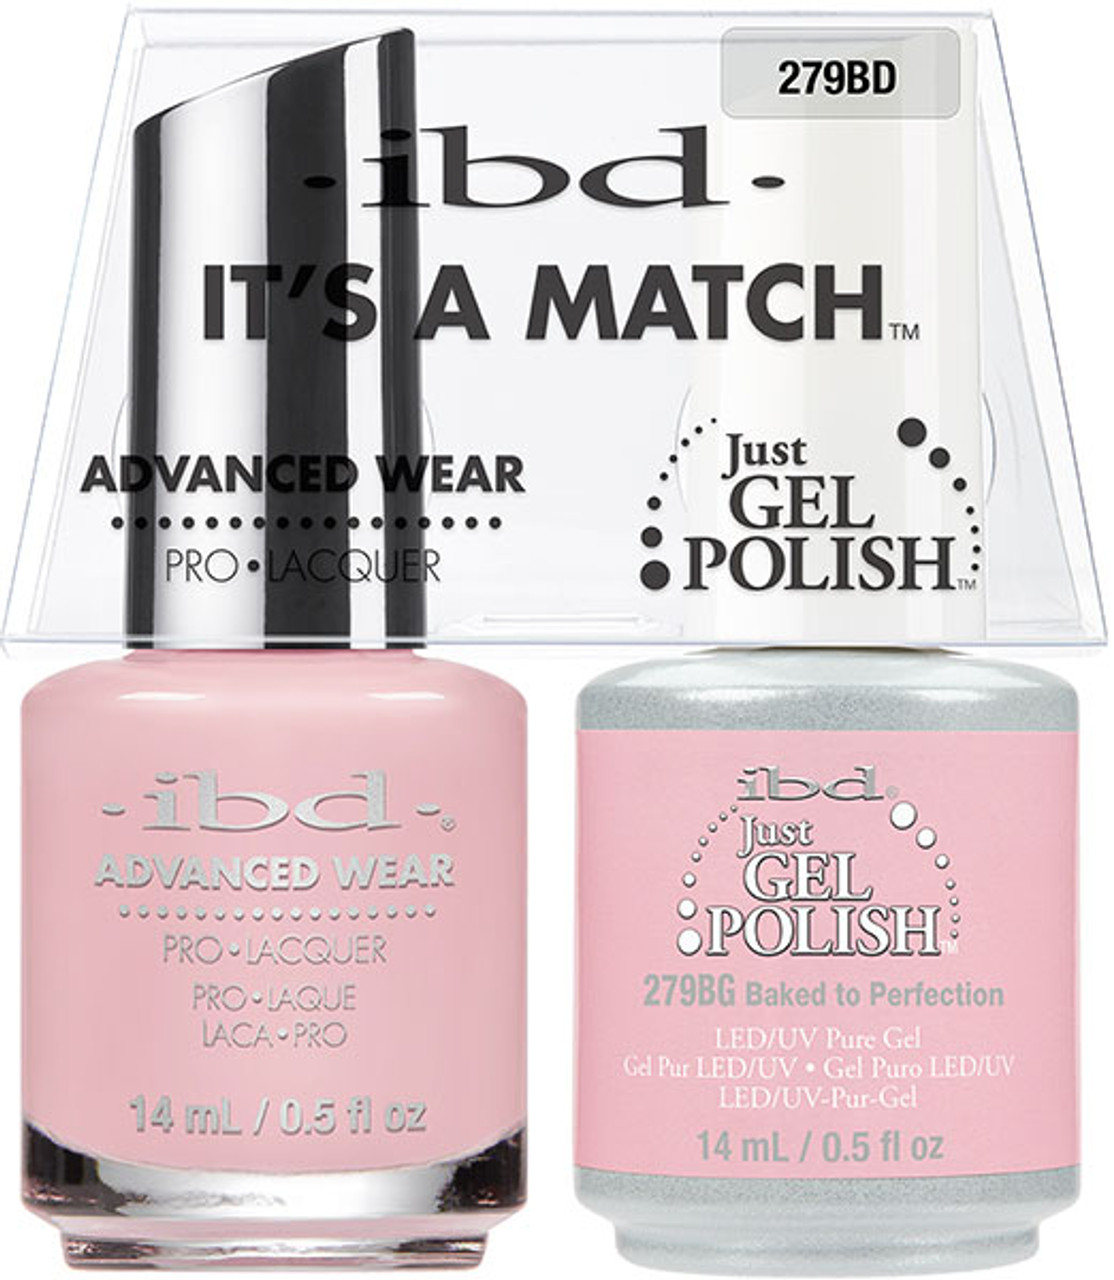 ibd It's A Match Advanced Wear Duo 274BD Baked to Perfection - 14 mL/ .5 oz